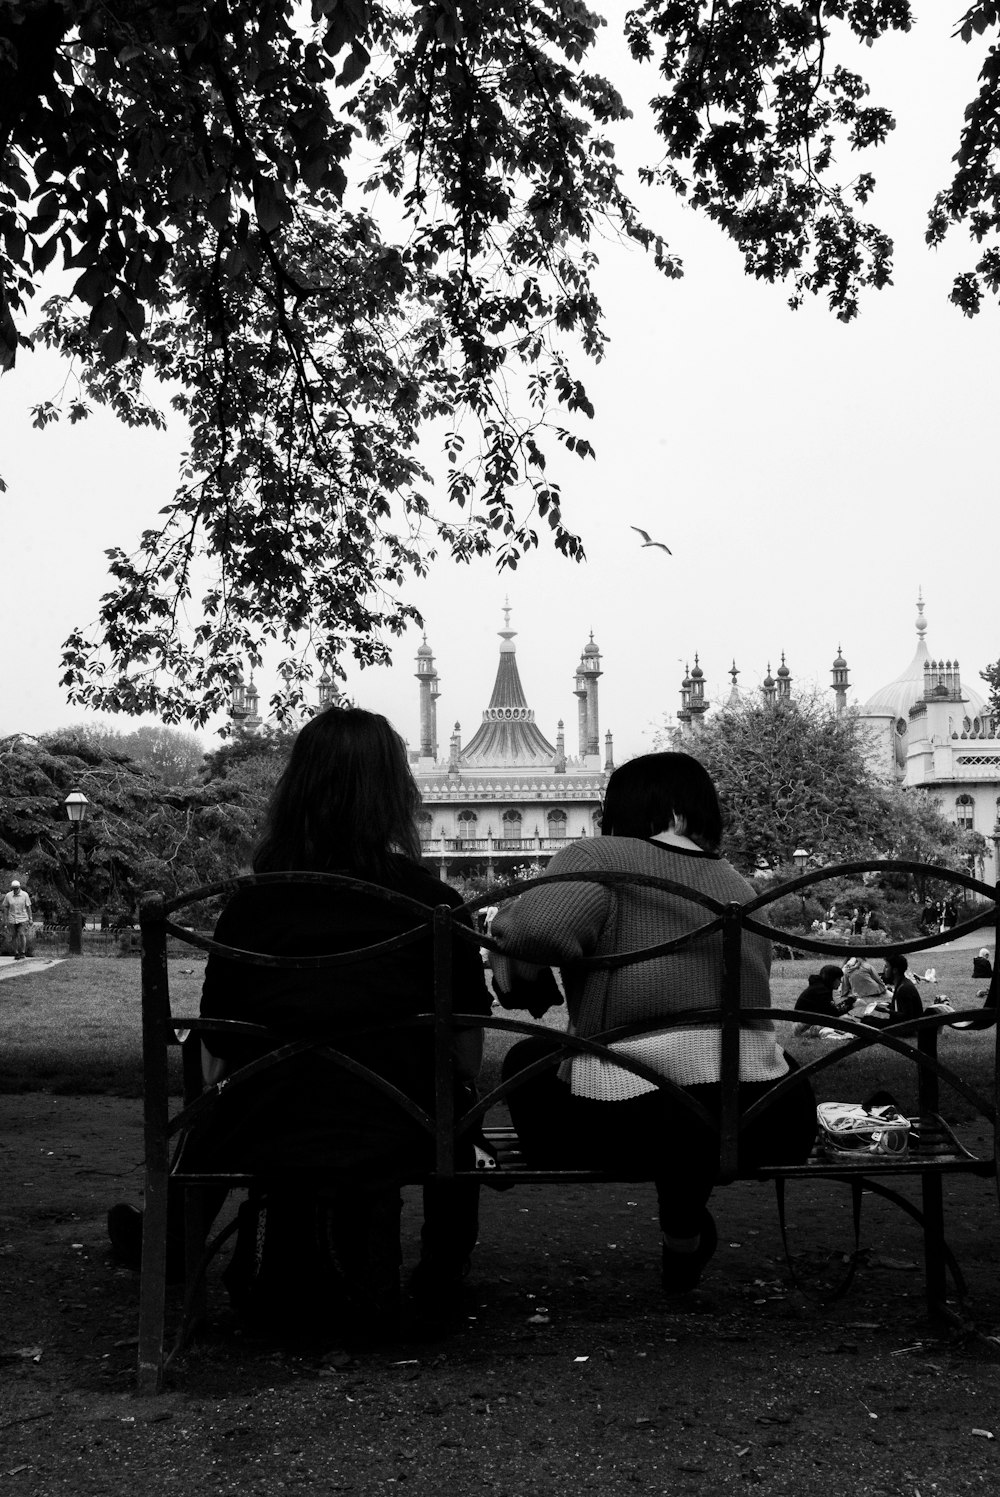 grayscale photo of 2 person sitting on bench